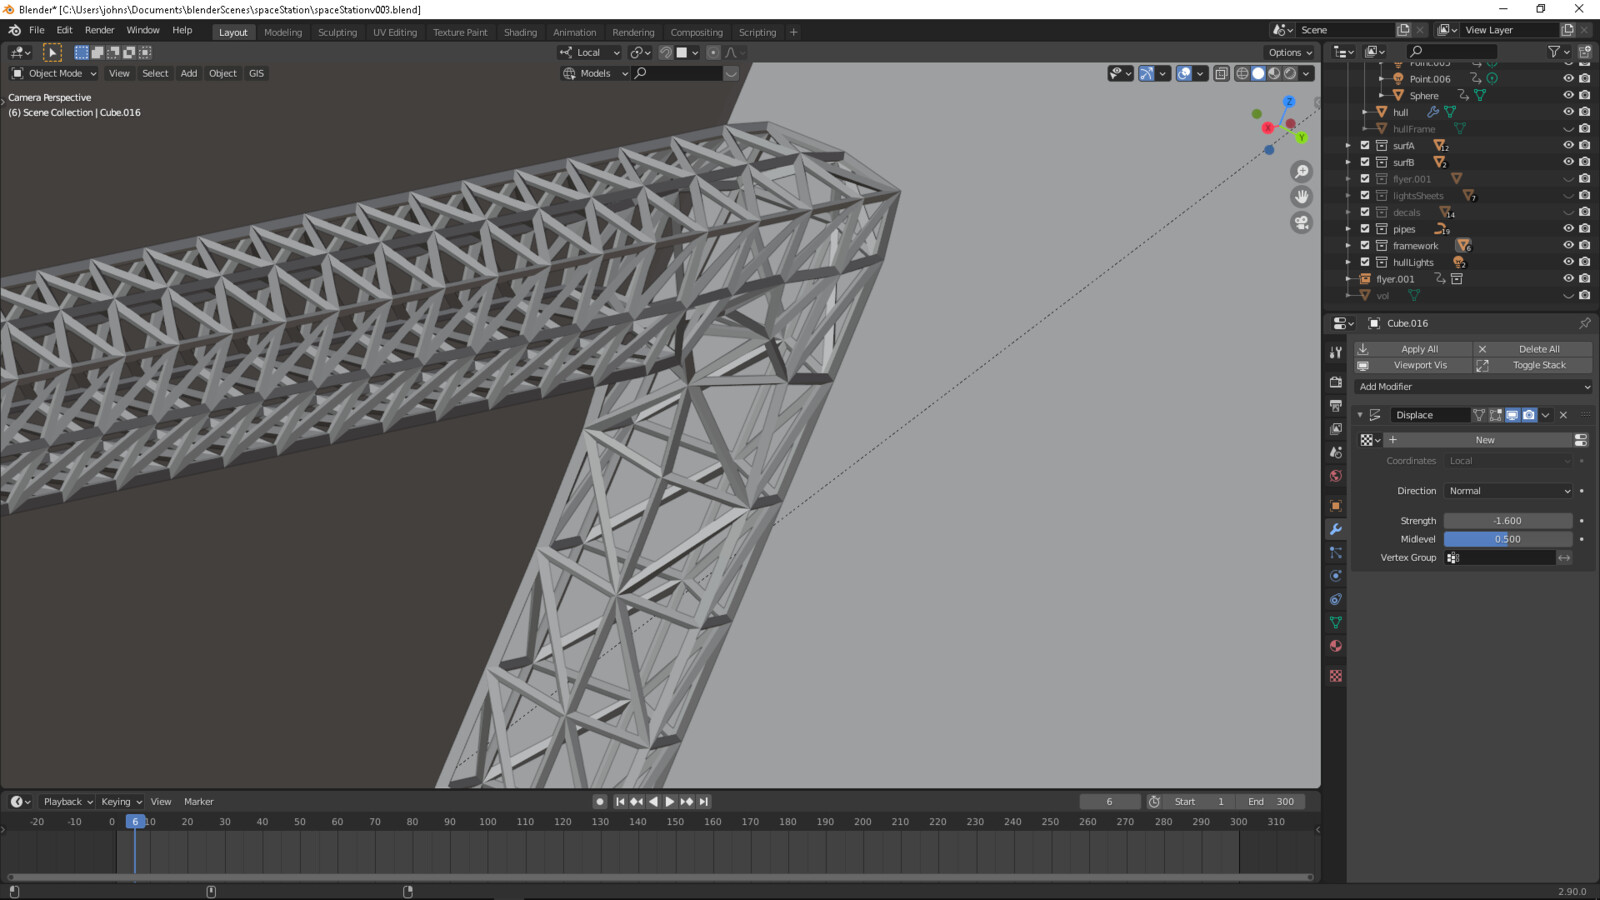 More detail with three modifiers, remesh, triangulate and wireframe...